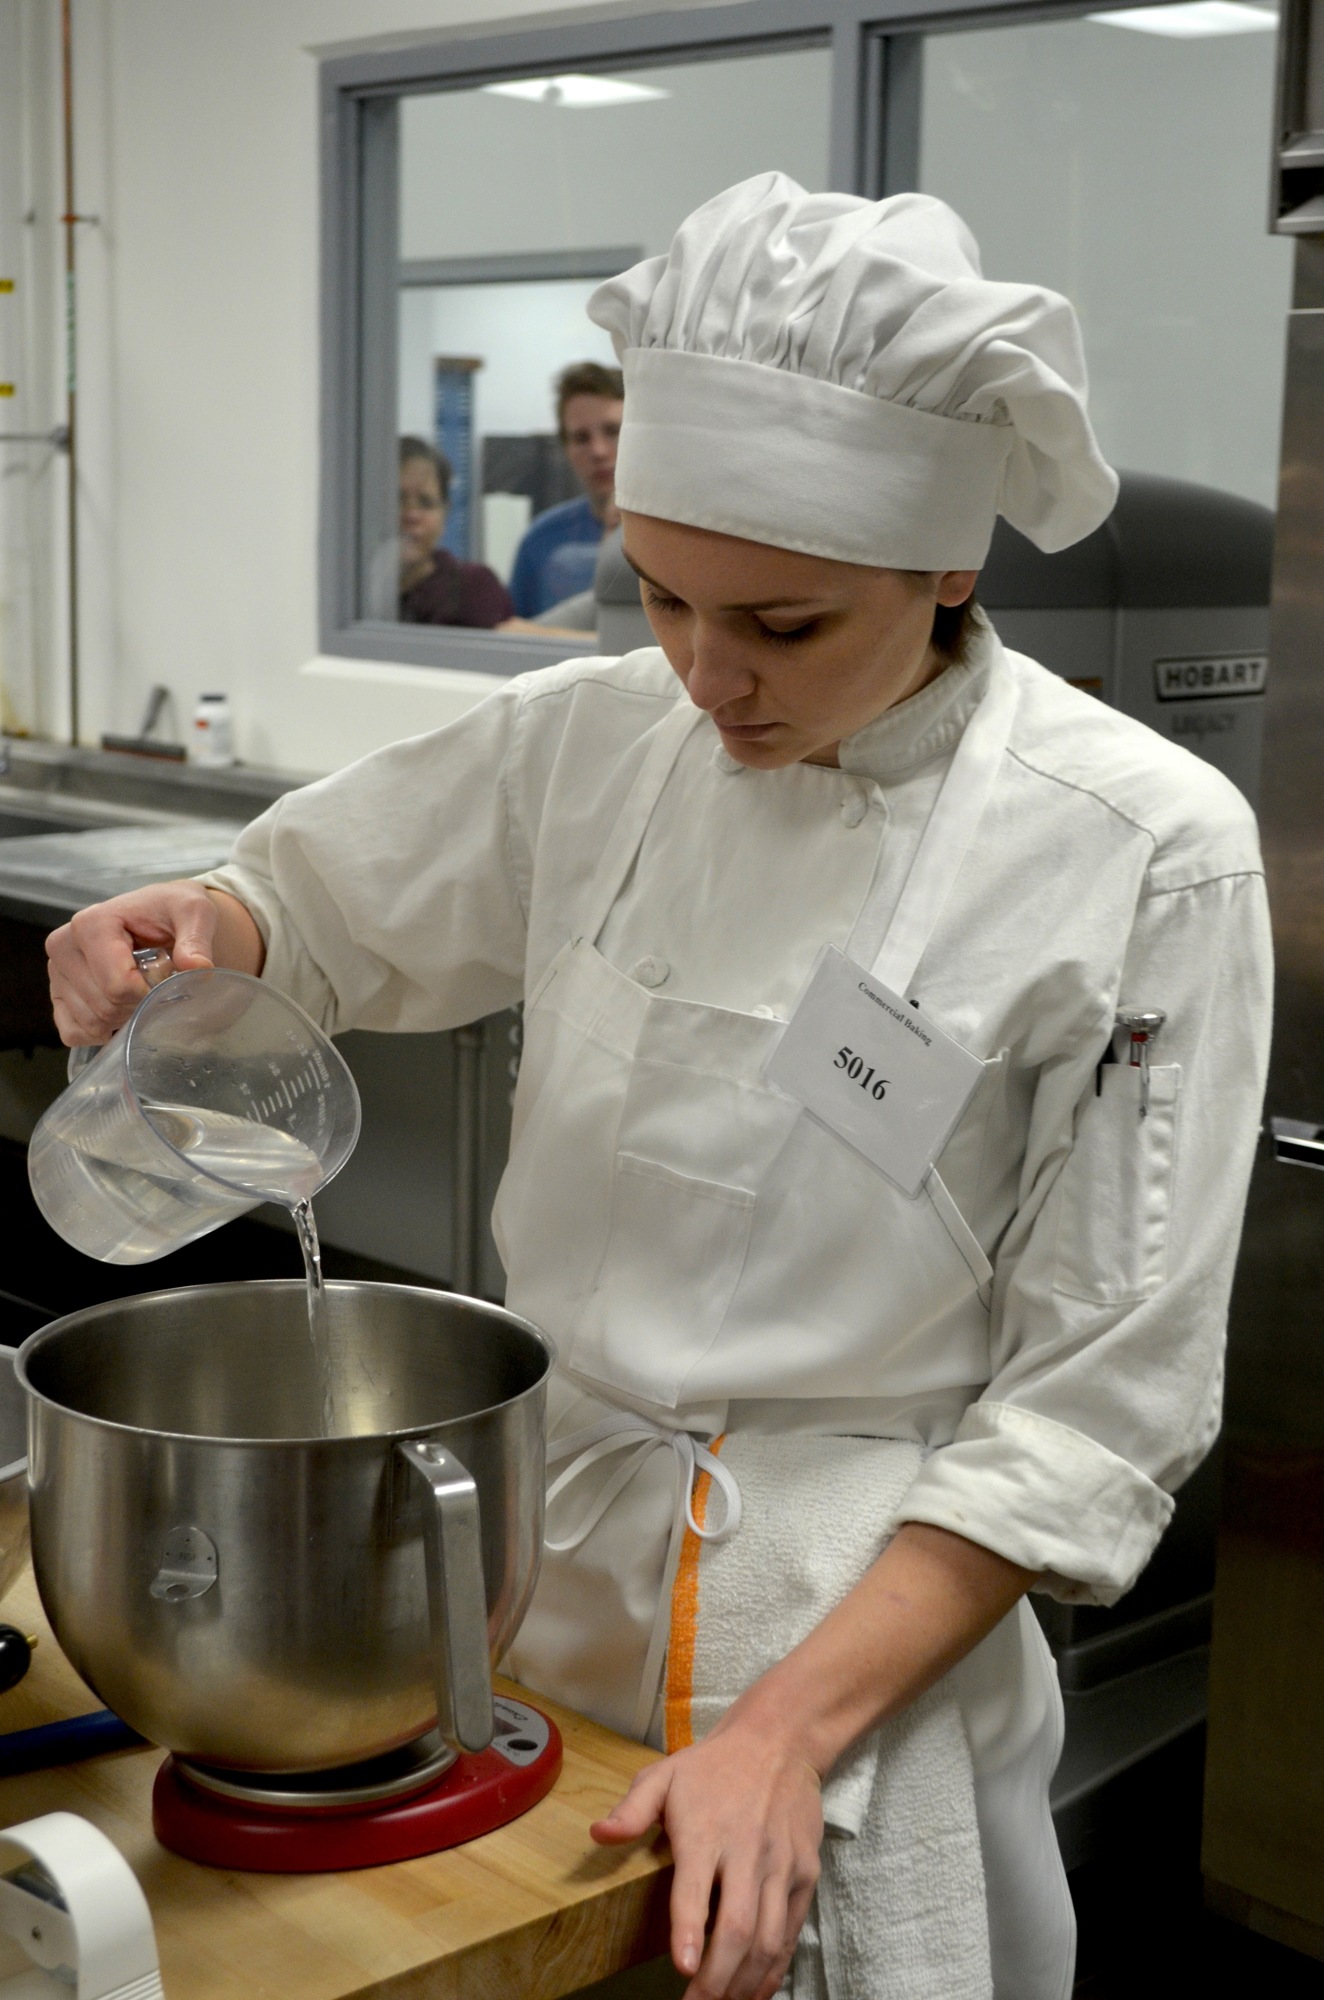 Manatee Technical College student Matika Liptrot measures ingredients for a recipe she's cooking.